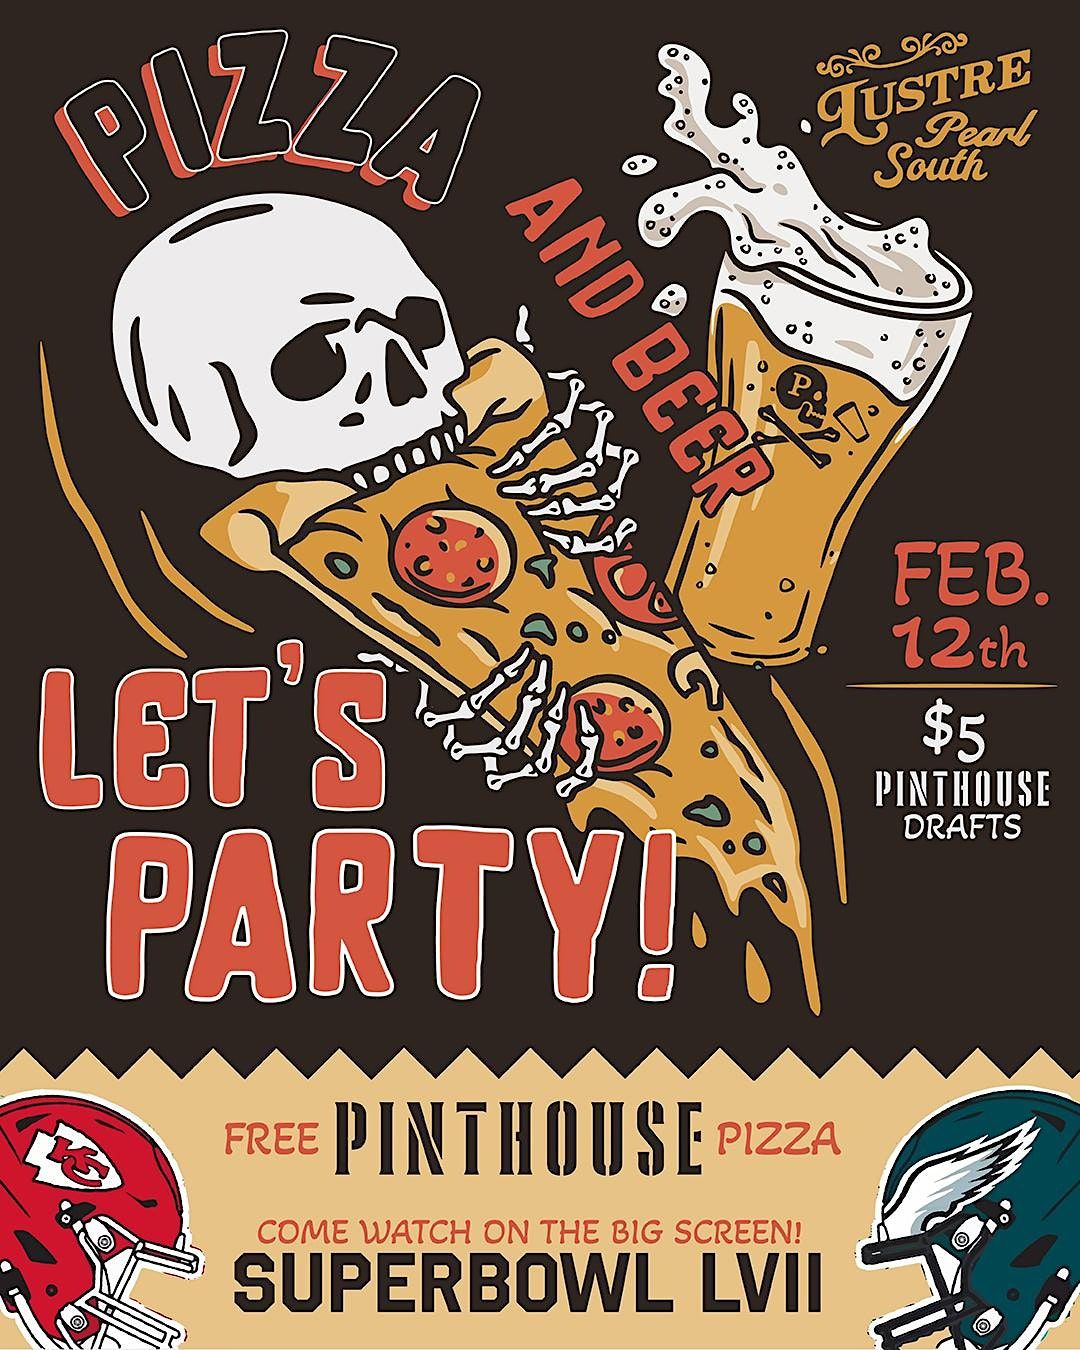 Super Bowl Pint House Pizza Party @ Lustre Pearl South